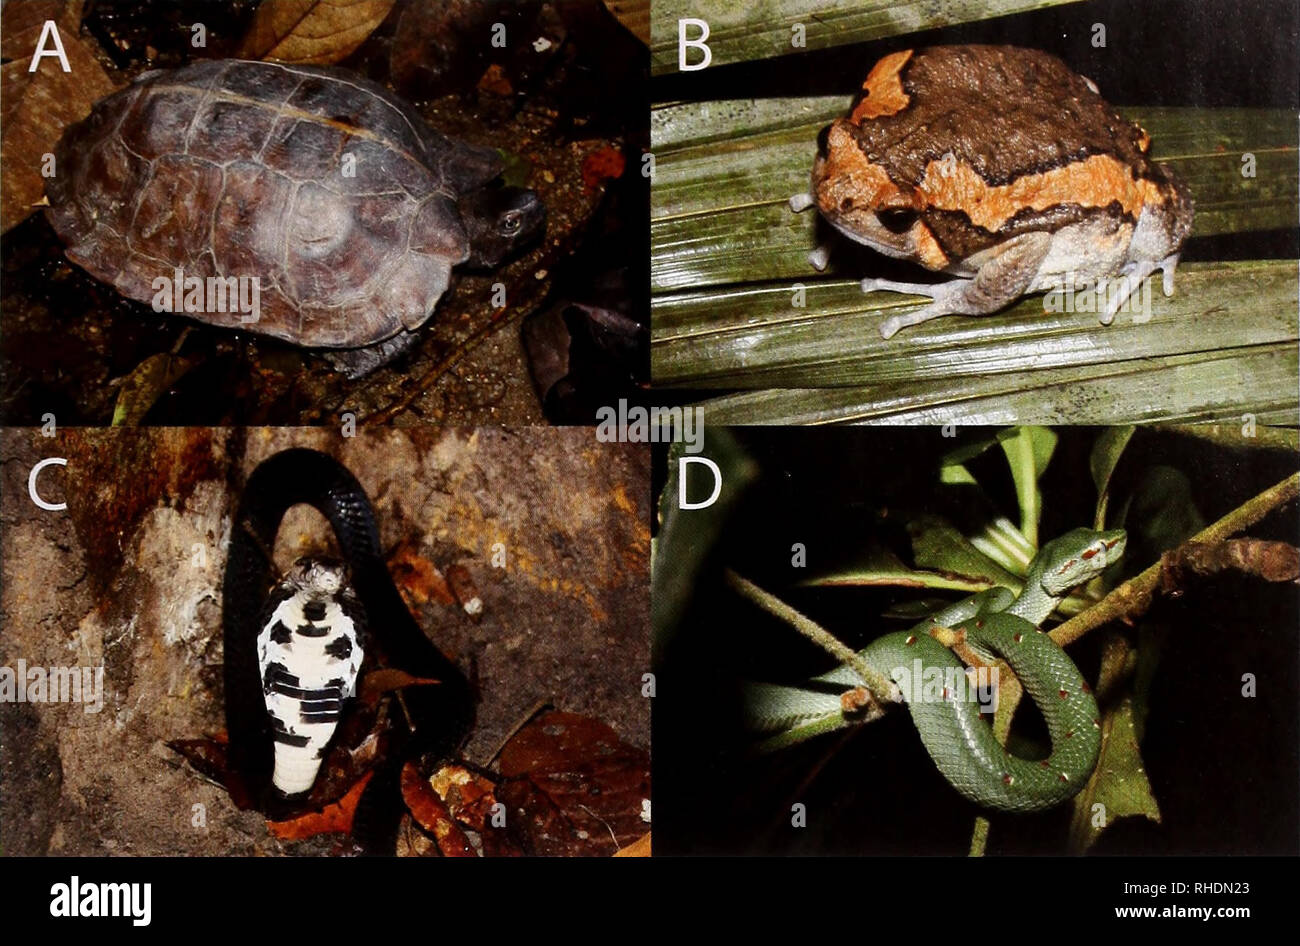 . Bonn zoological bulletin. Zoology. Estimating herpetofaunal species richness 5. Fig. 2. A: Heosemys spinosa (Gray, 1831); B: Kaloula pulchra Gray, 1831; C: Naja sumatrana (Mtiller, 1890); D: Tropidolae- mus wagleri (Boie, 1827). 2005). Four models were fitted to the rarefaction curve. The first corresponds with a negative exponential model (Colwell &amp; Coddington 1994; Flather 1996; Van Rooijen 2009). It is based on the assumption that the number of new species found per search day is proportional to the number of as yet undiscovered species, in mathematical terms: dYldt = c {A-Y) where A  Stock Photo